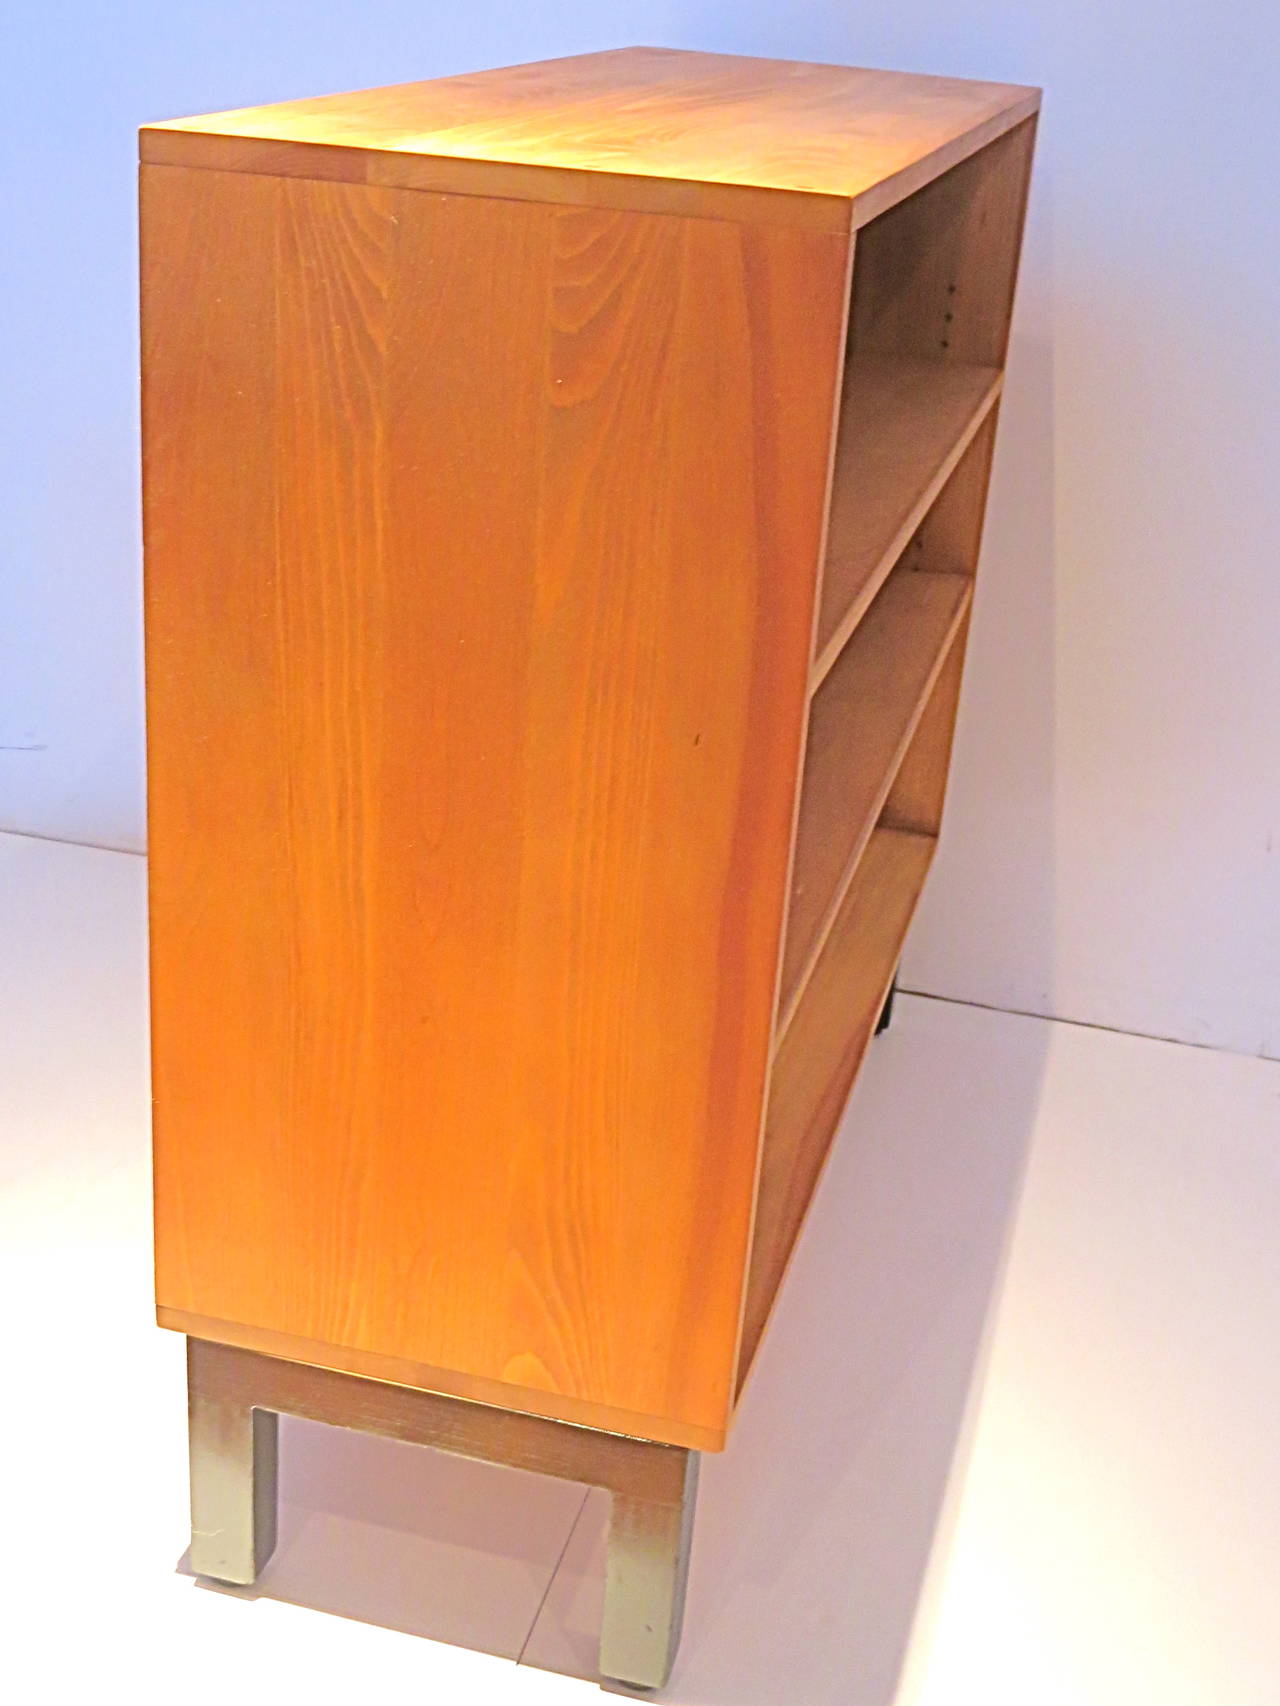 20th Century American Modern 1950s  solid ash wood book caze with orange back.